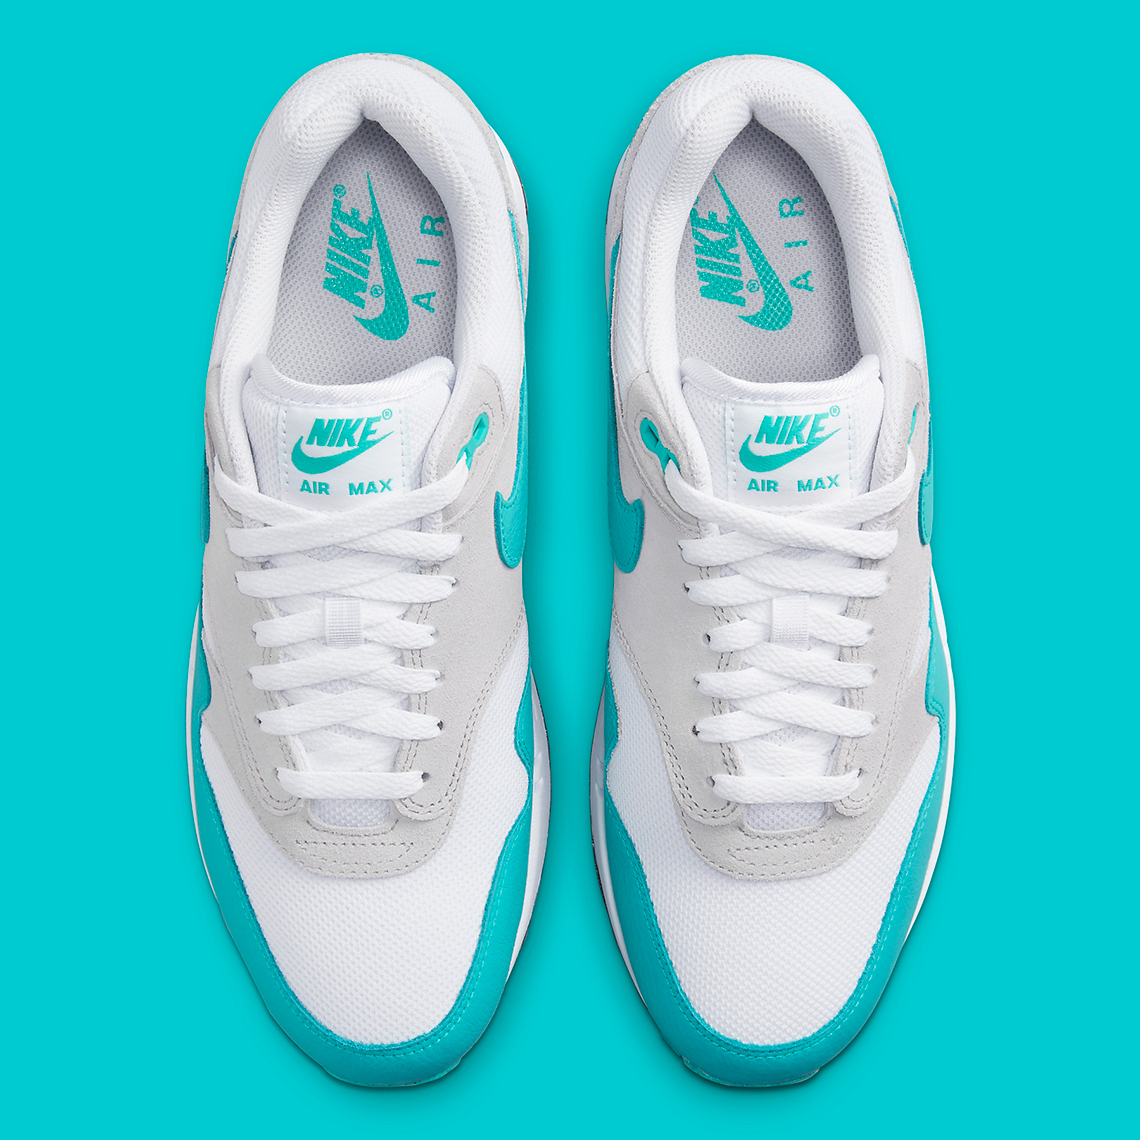 Nike Air Max 1 Clear Jade  The newest addition to Nike's summer roster -  The Drop Date